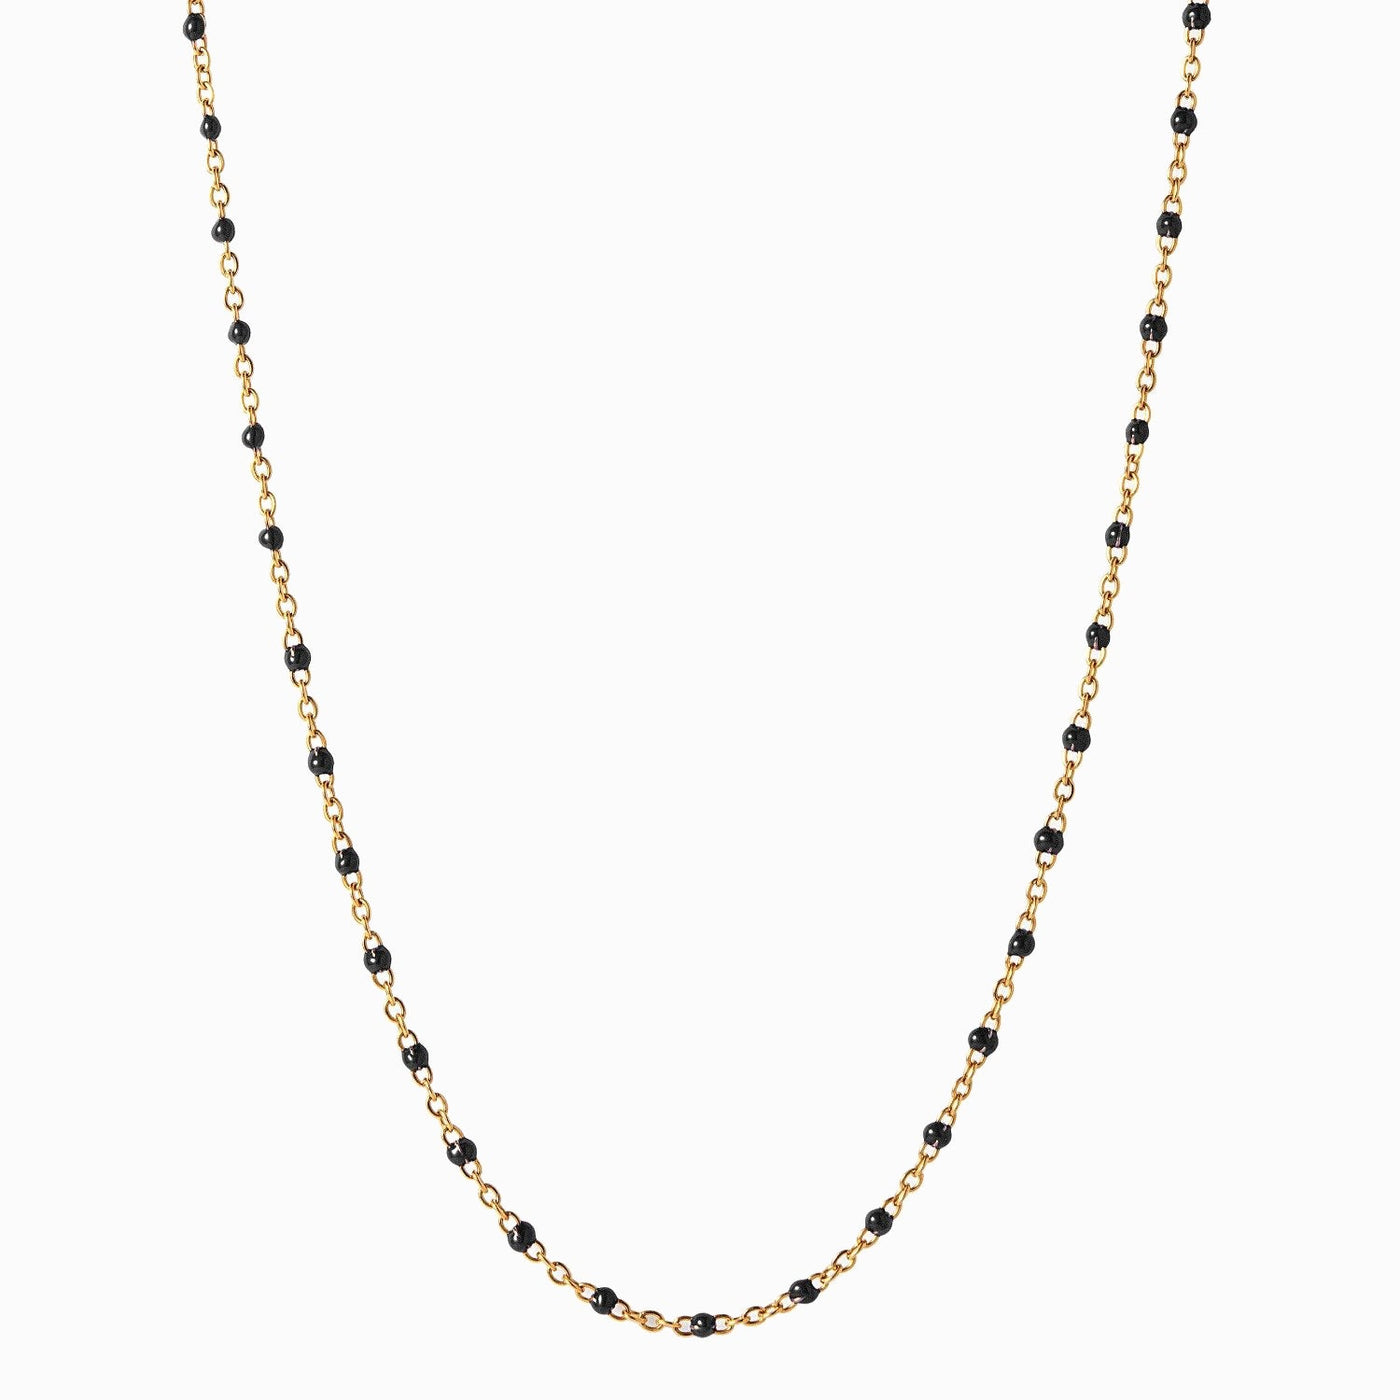 Black Beaded Enamel Necklace by Awe Inspired